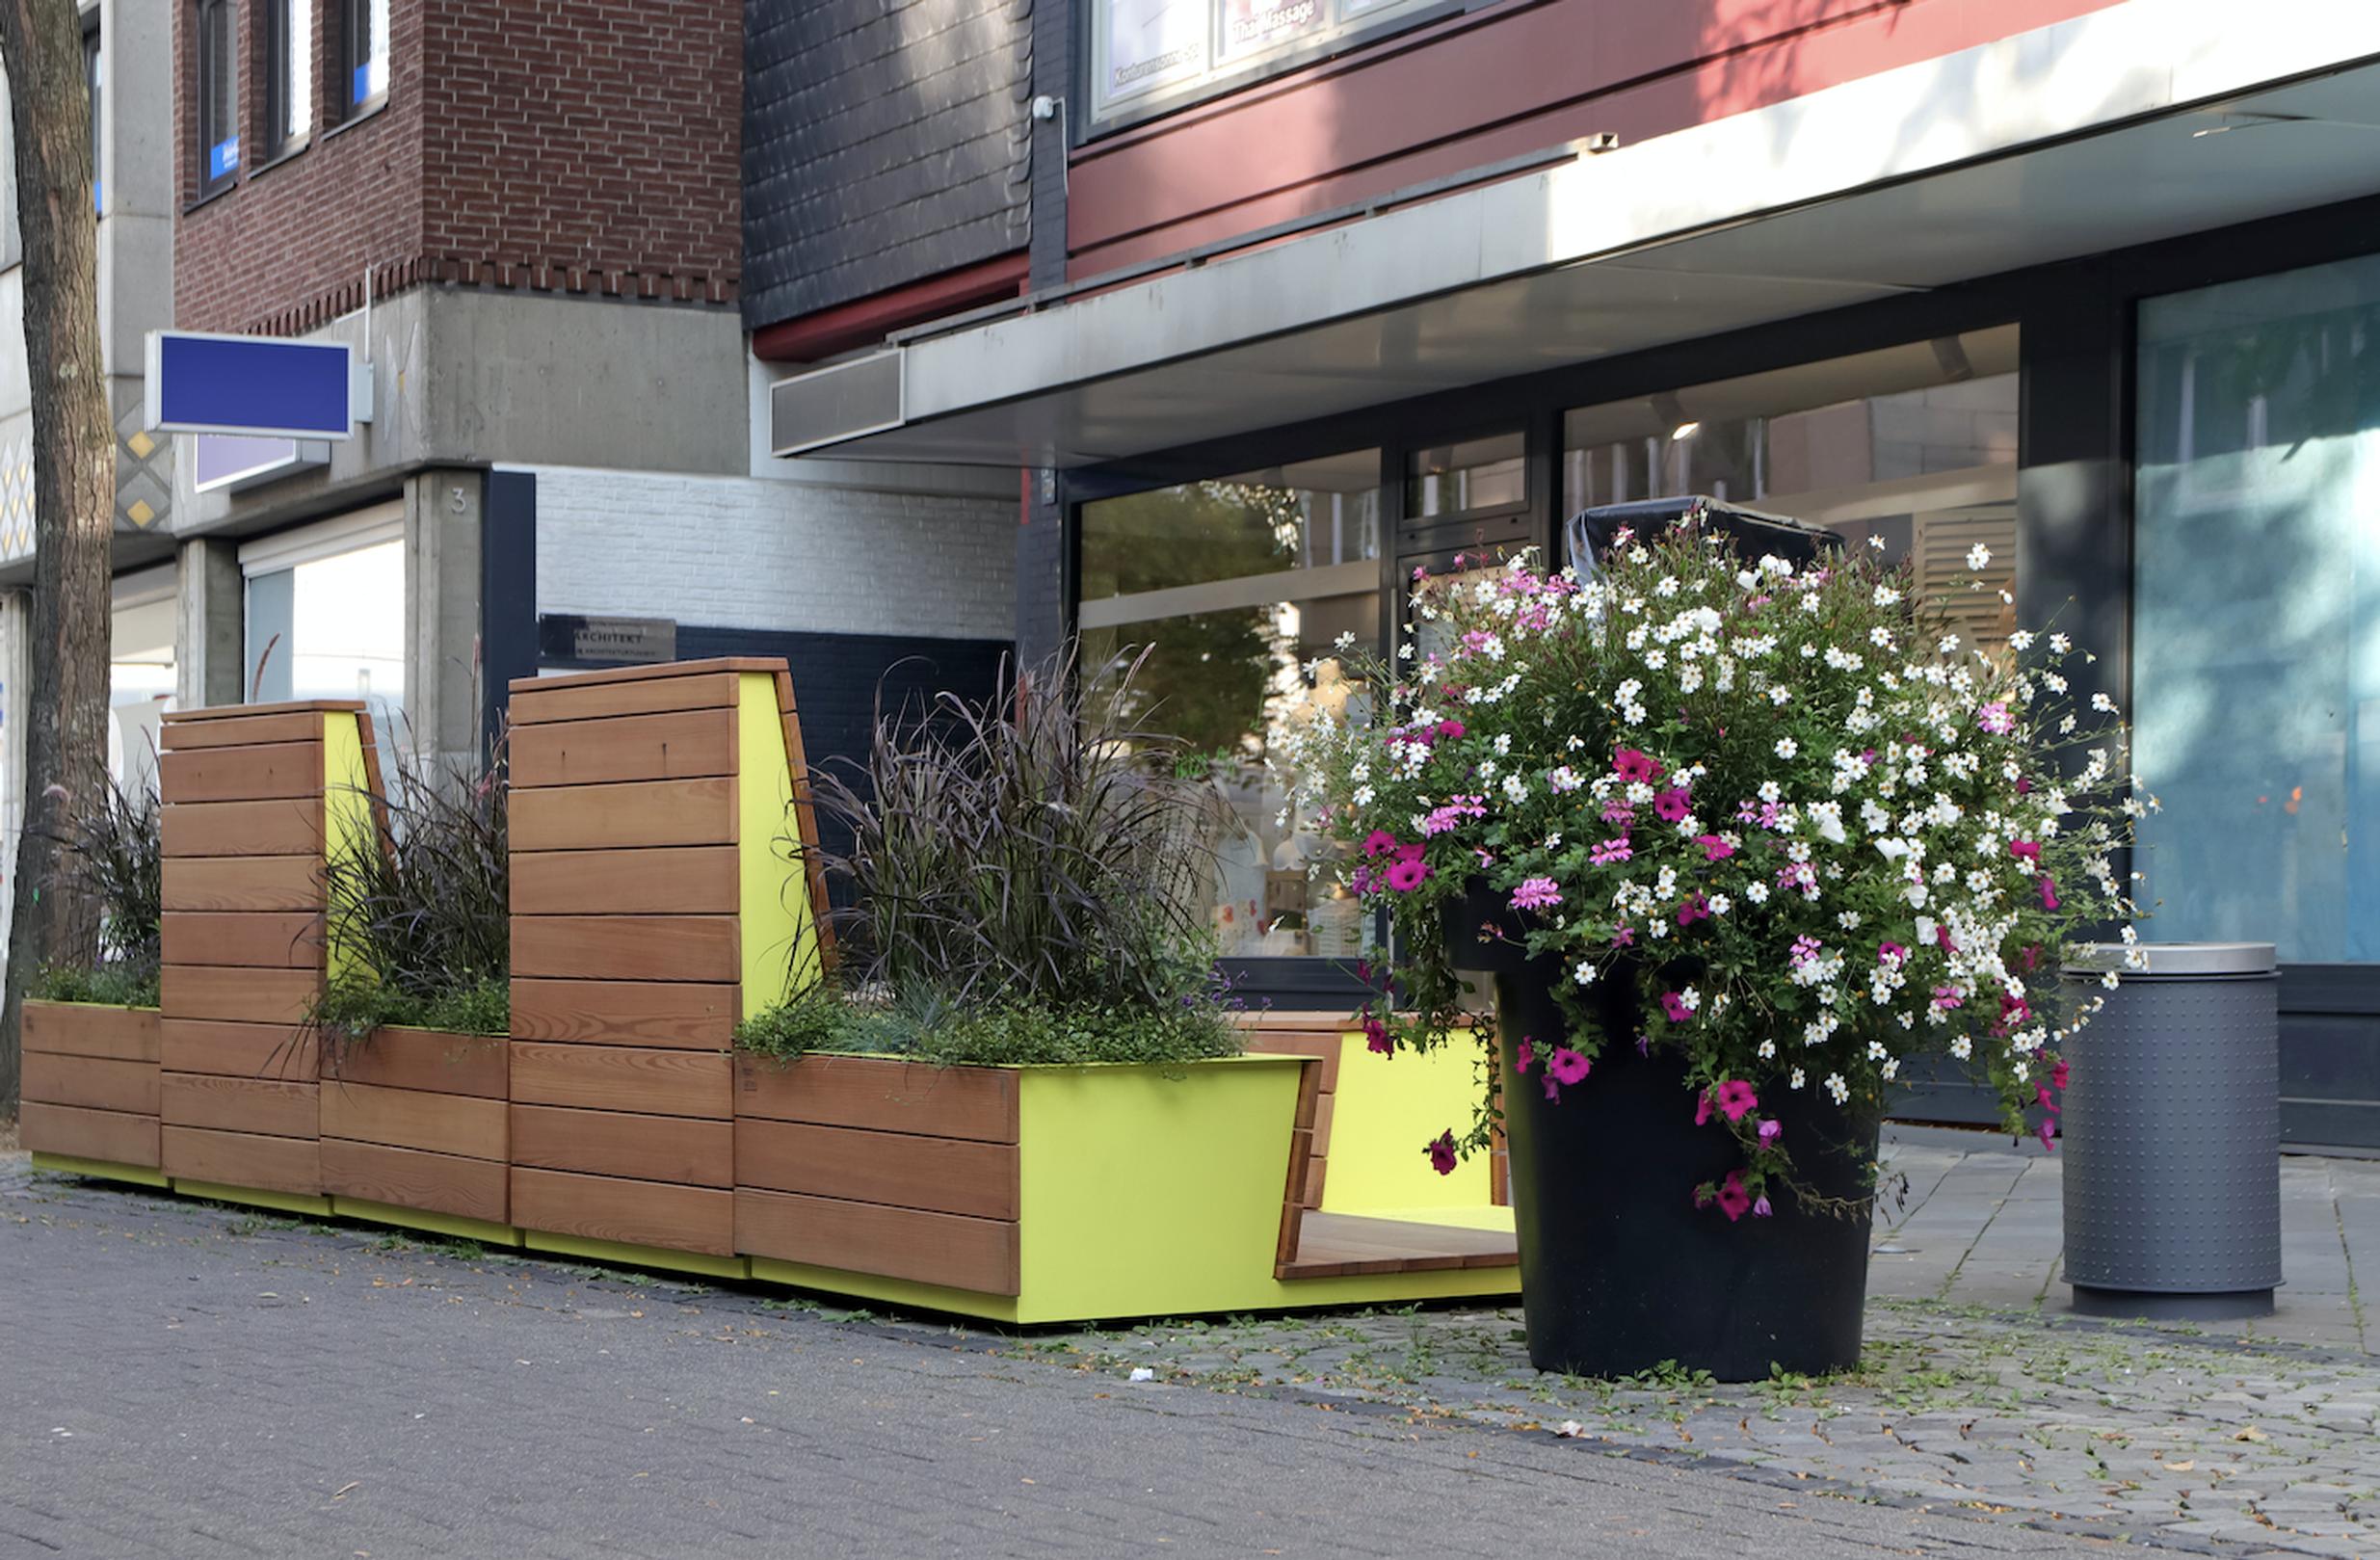 Hounslow is keen to promote parklets